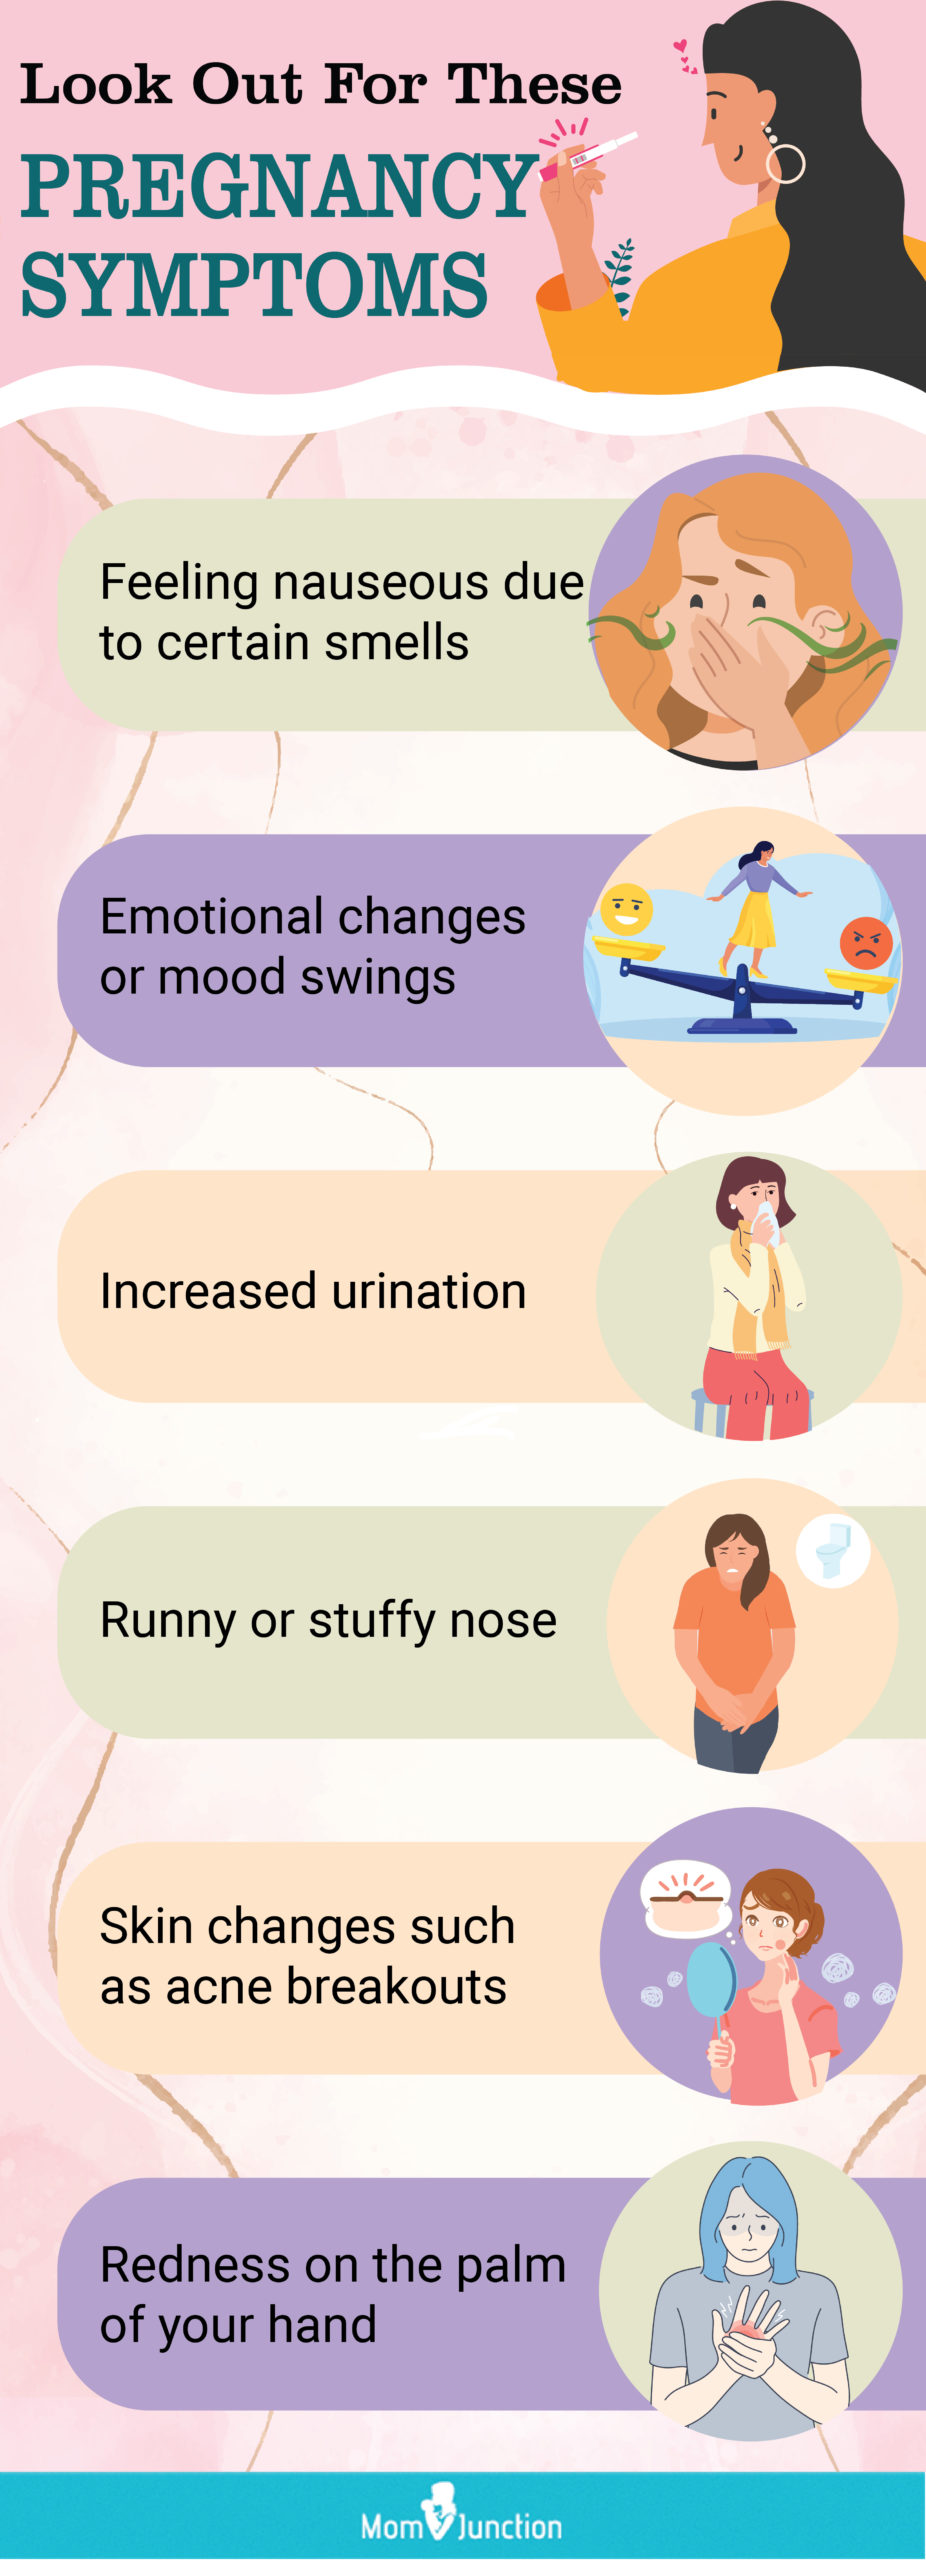 early pregnancy signs due to hormonal alterations [infographic]